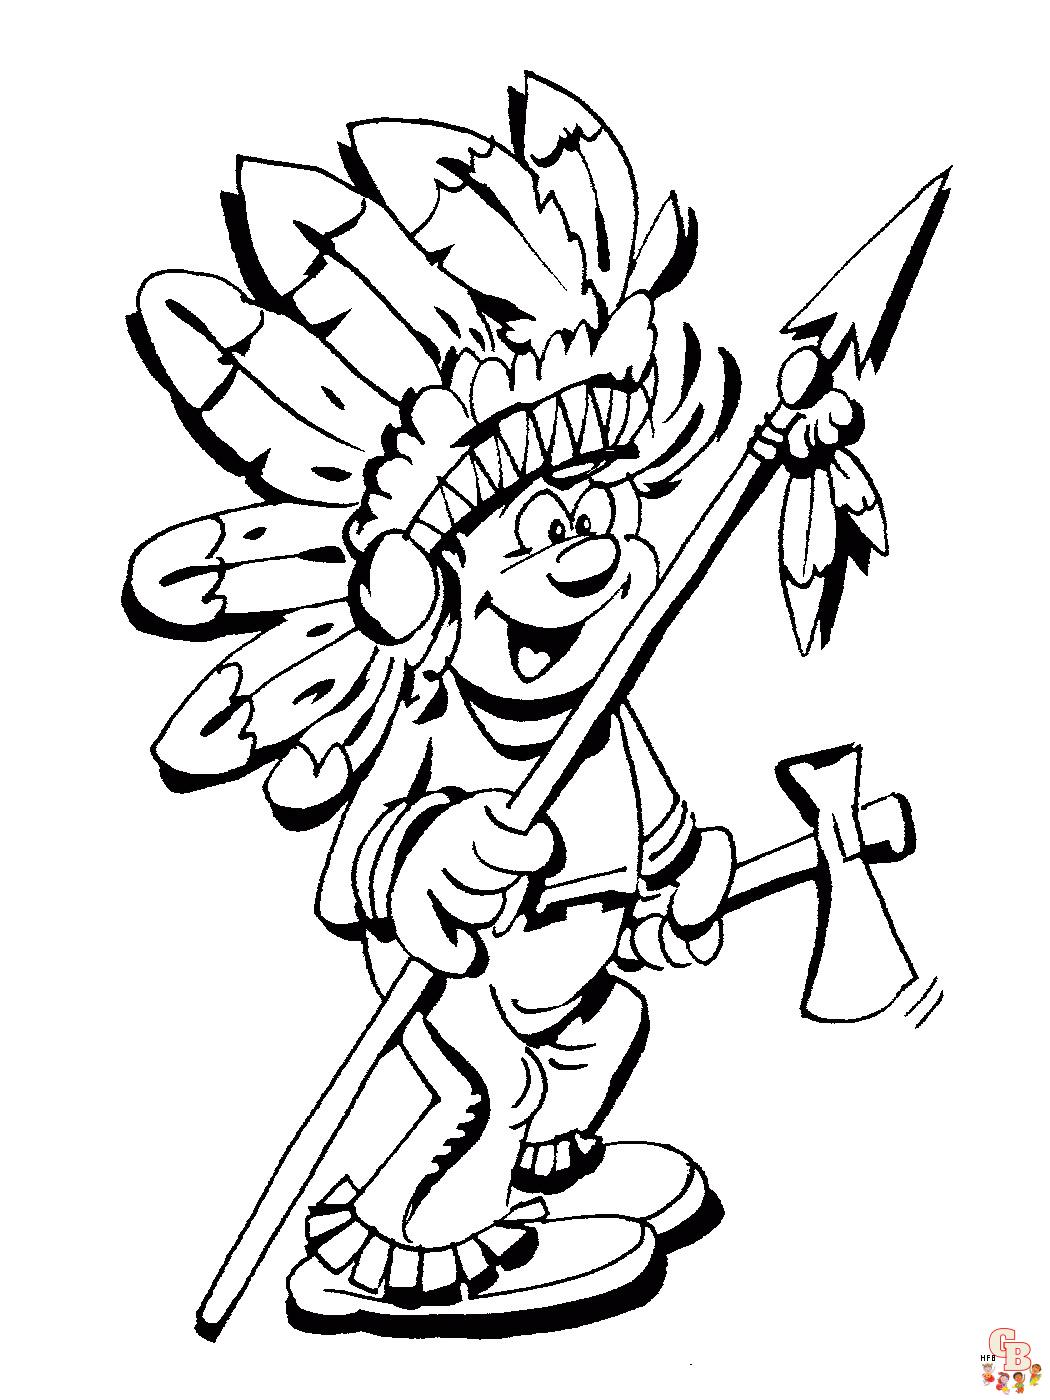 Free printable native american coloring pages for kids